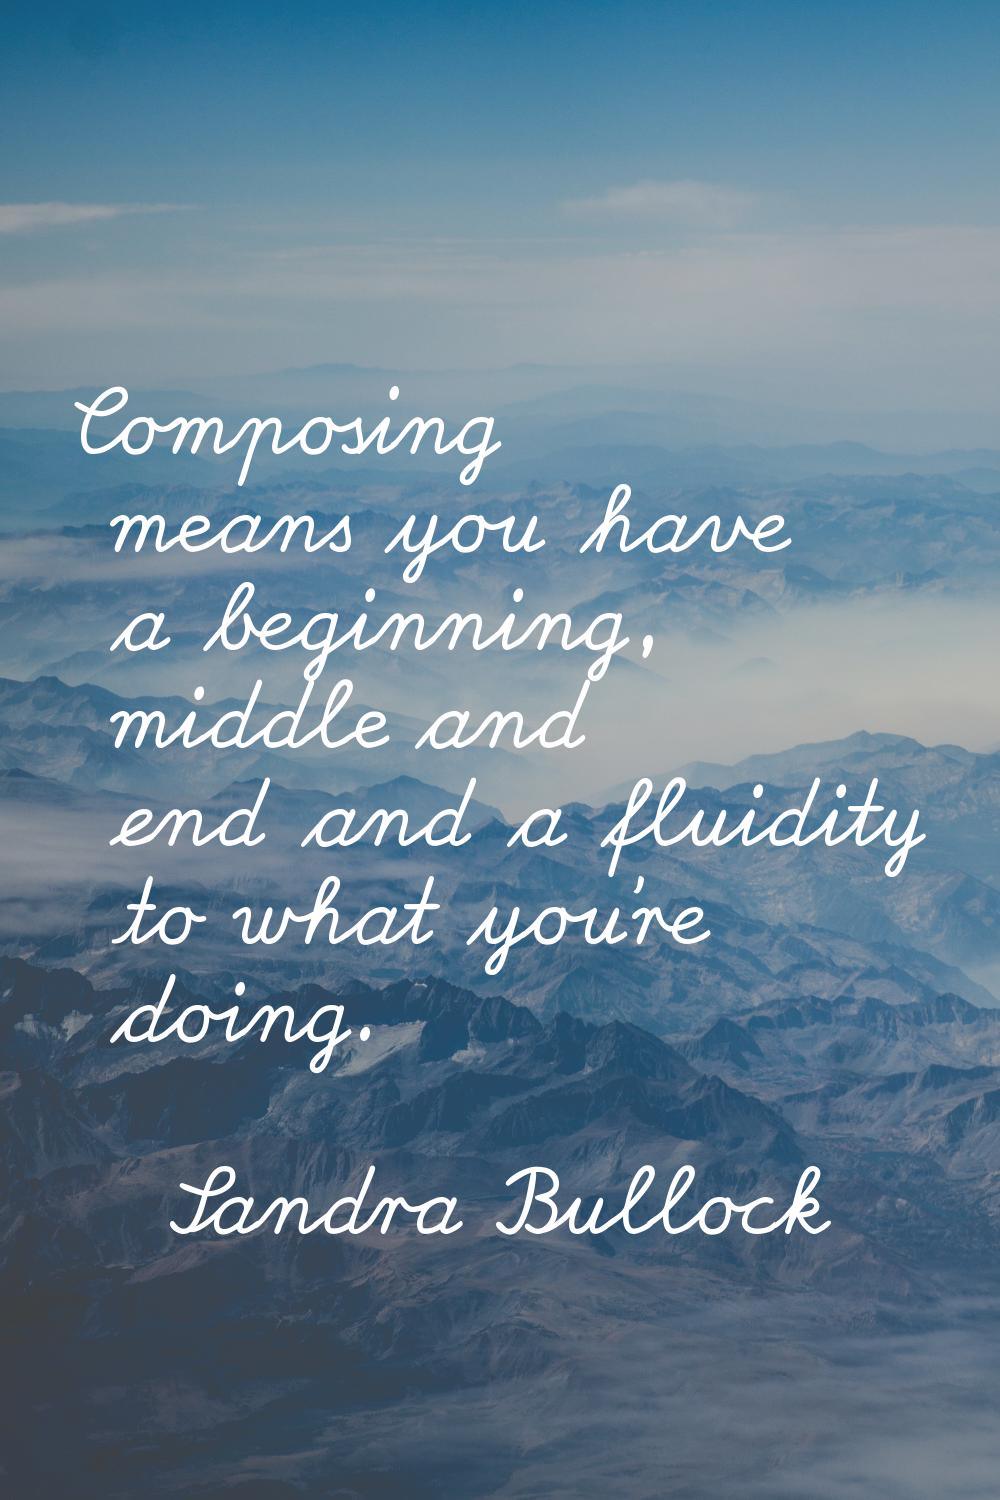 Composing means you have a beginning, middle and end and a fluidity to what you're doing.